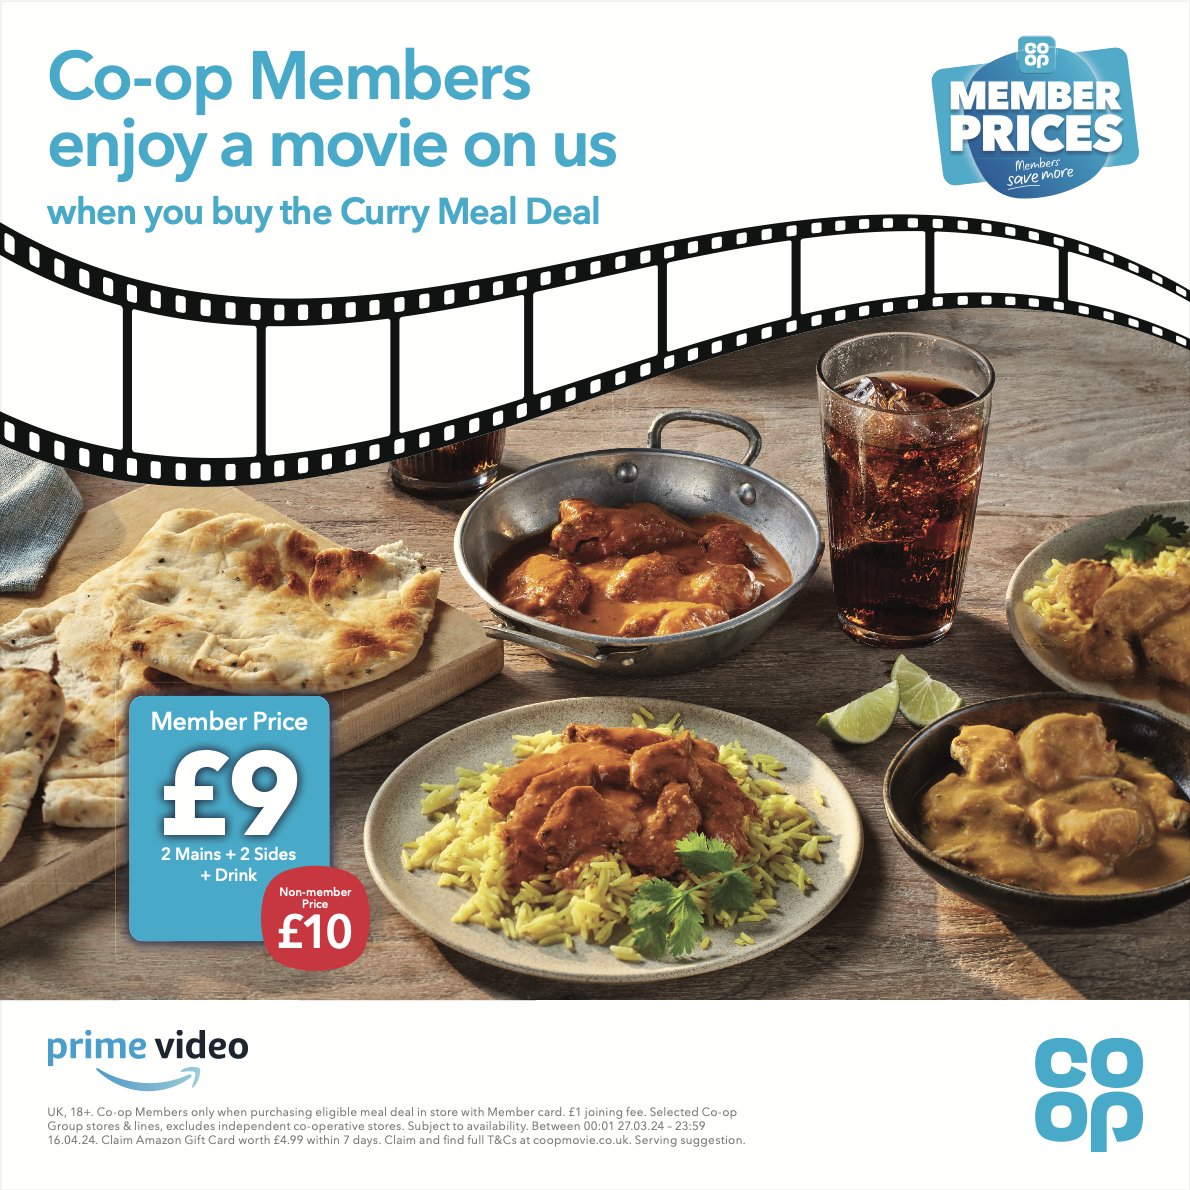 Co-op Members, grab the Curry Meal Deal in your local #Knutsfordrd #Warrington #Latchford @coopuk store and enjoy a free movie on Amazon Prime 🥘 🎥 Find out more 👉 coop.co.uk/products/deals….